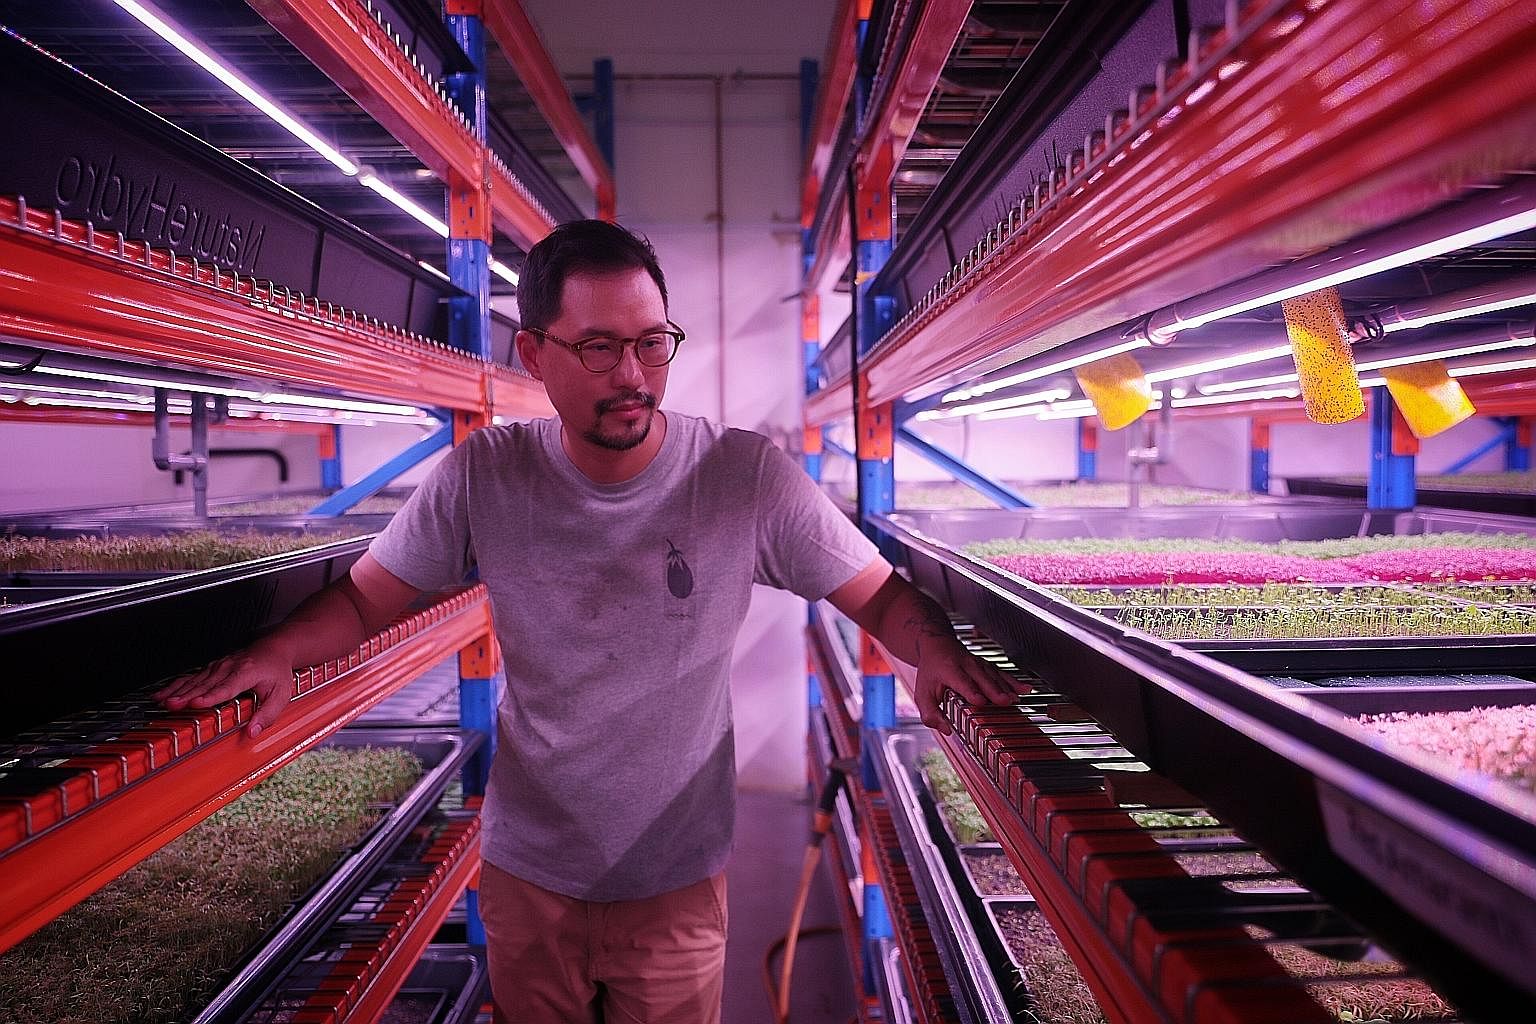 Mr Bjorn Low was a high-flying adman, but gave it up to start urban farming social enterprise Edible Garden City, which aims to create social change through community-centric agriculture.